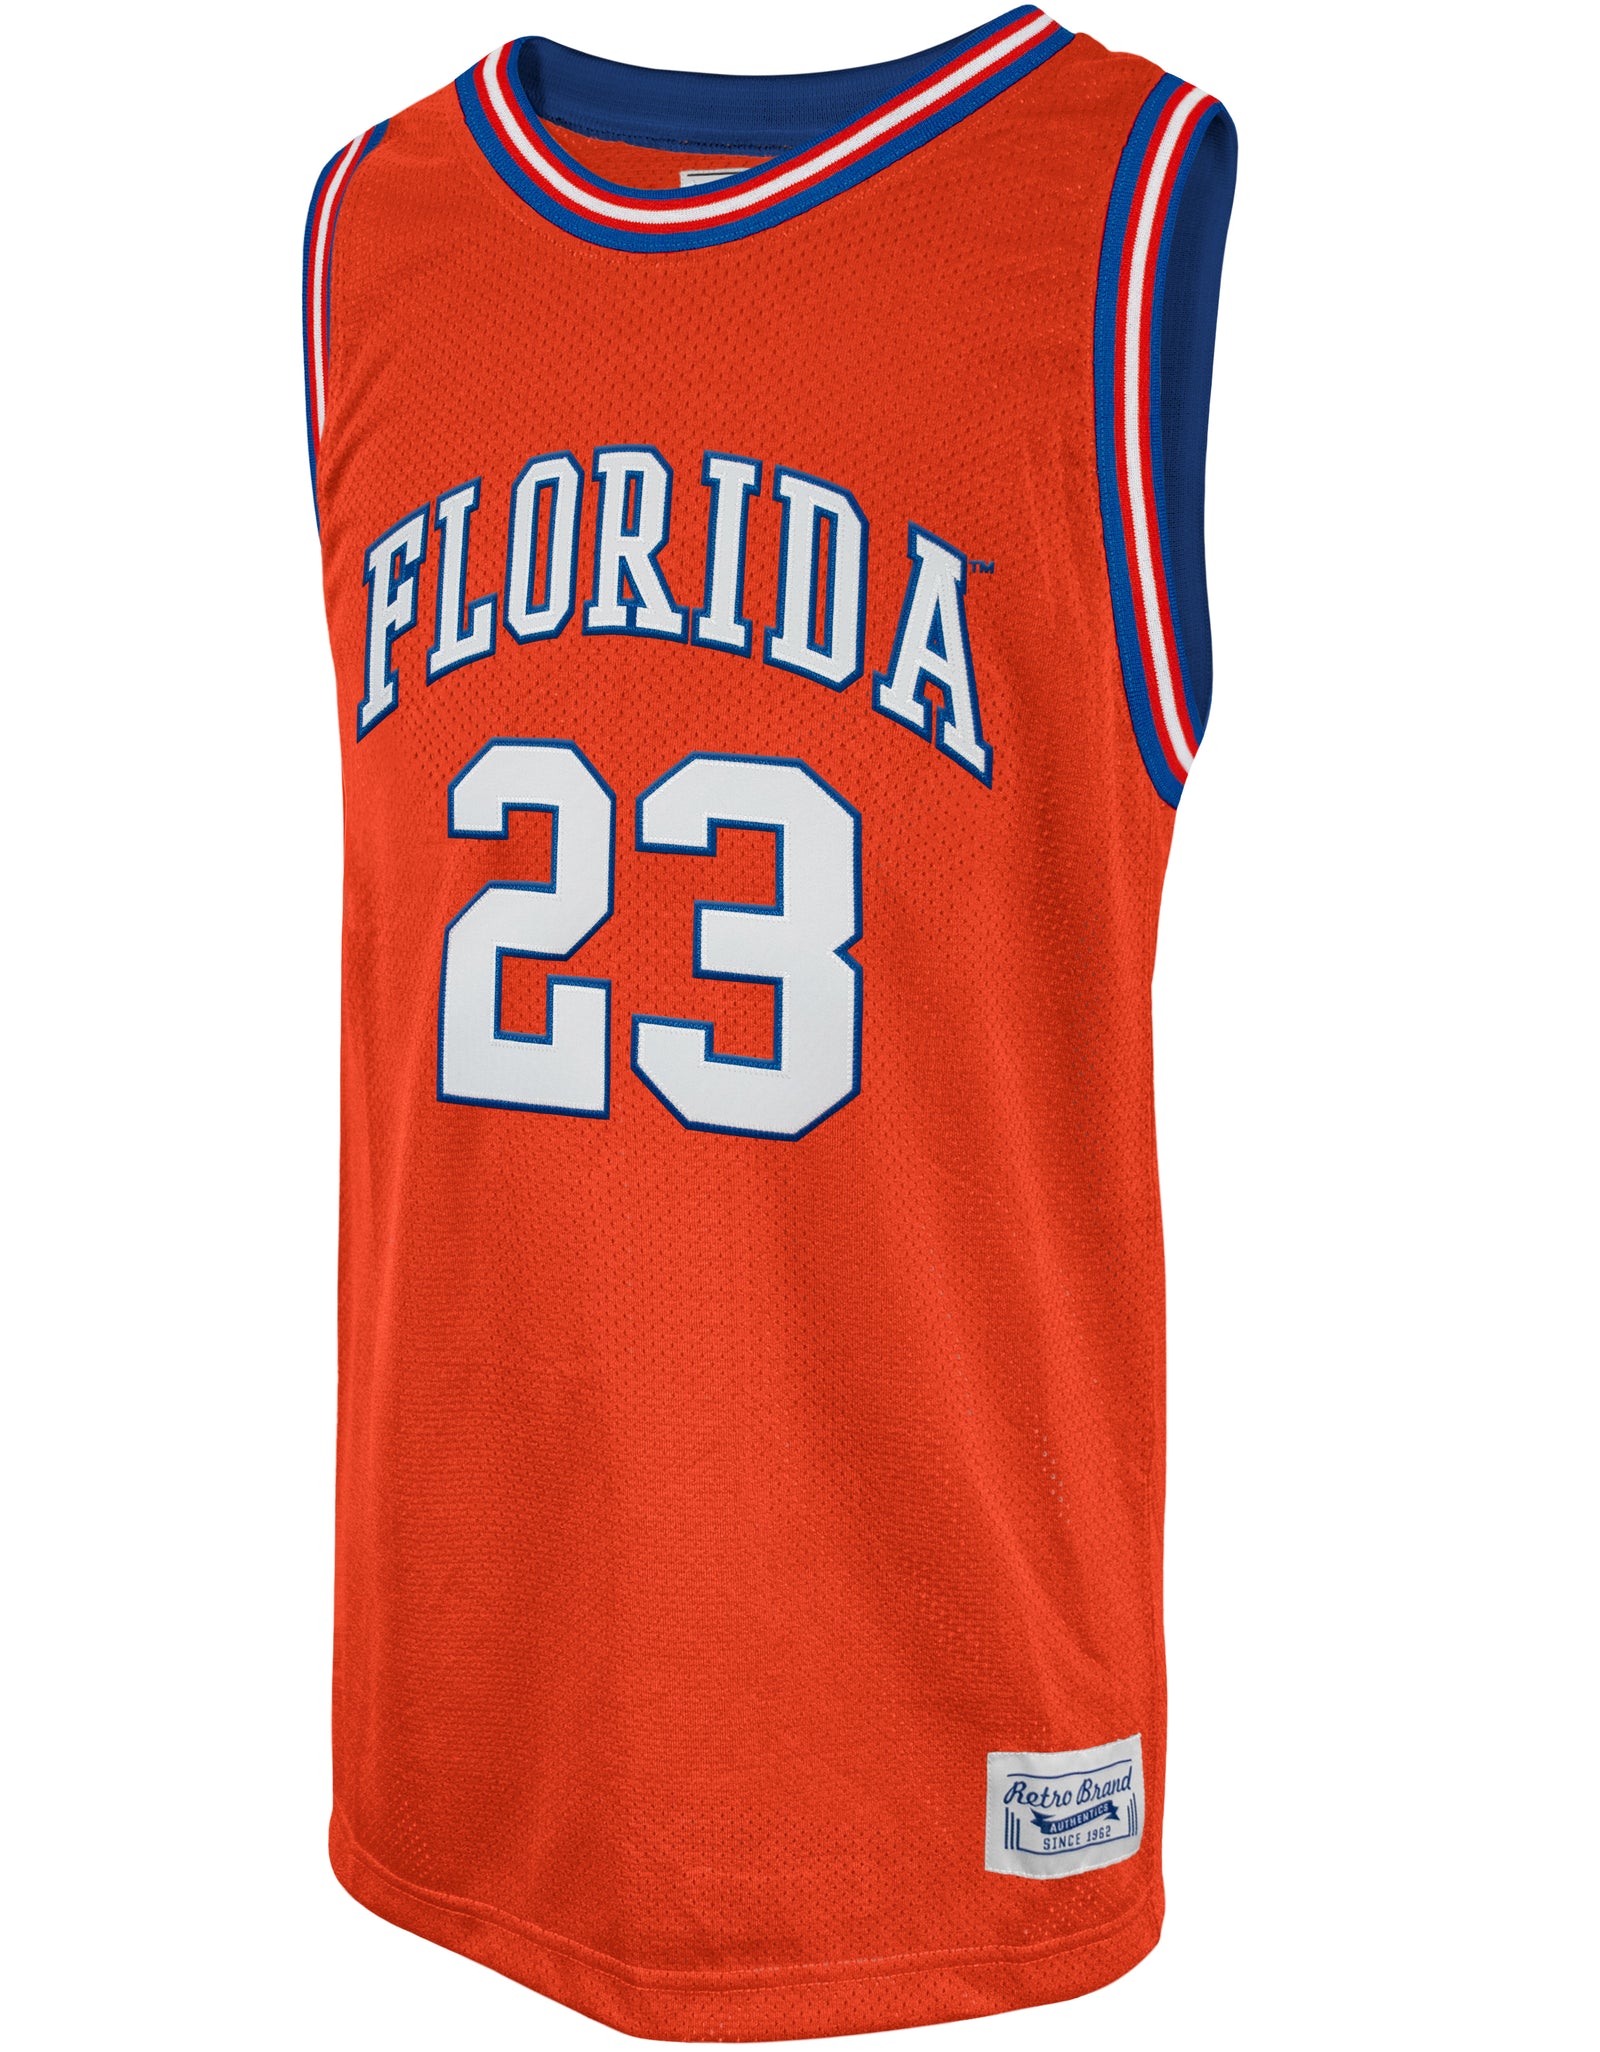 The definitive guide to buying an NBA jersey in 2013